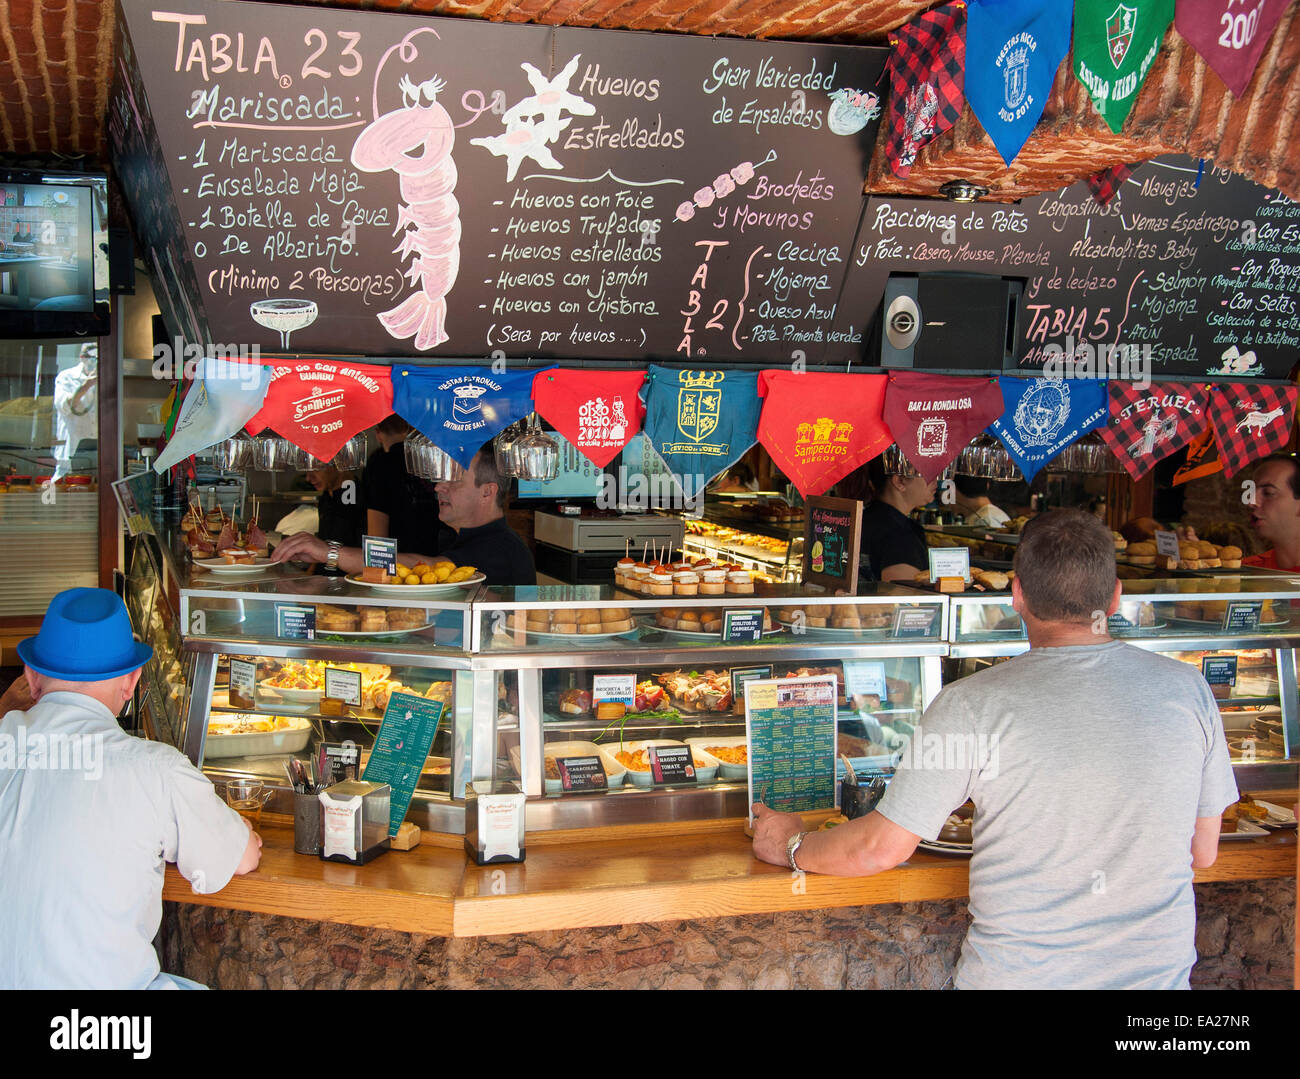 Tapas on display in the showcases of Tapas Restaurant "Cava Aragonesa" in  the old town of Benidorm on the Costa Blanca, Alican Stock Photo - Alamy